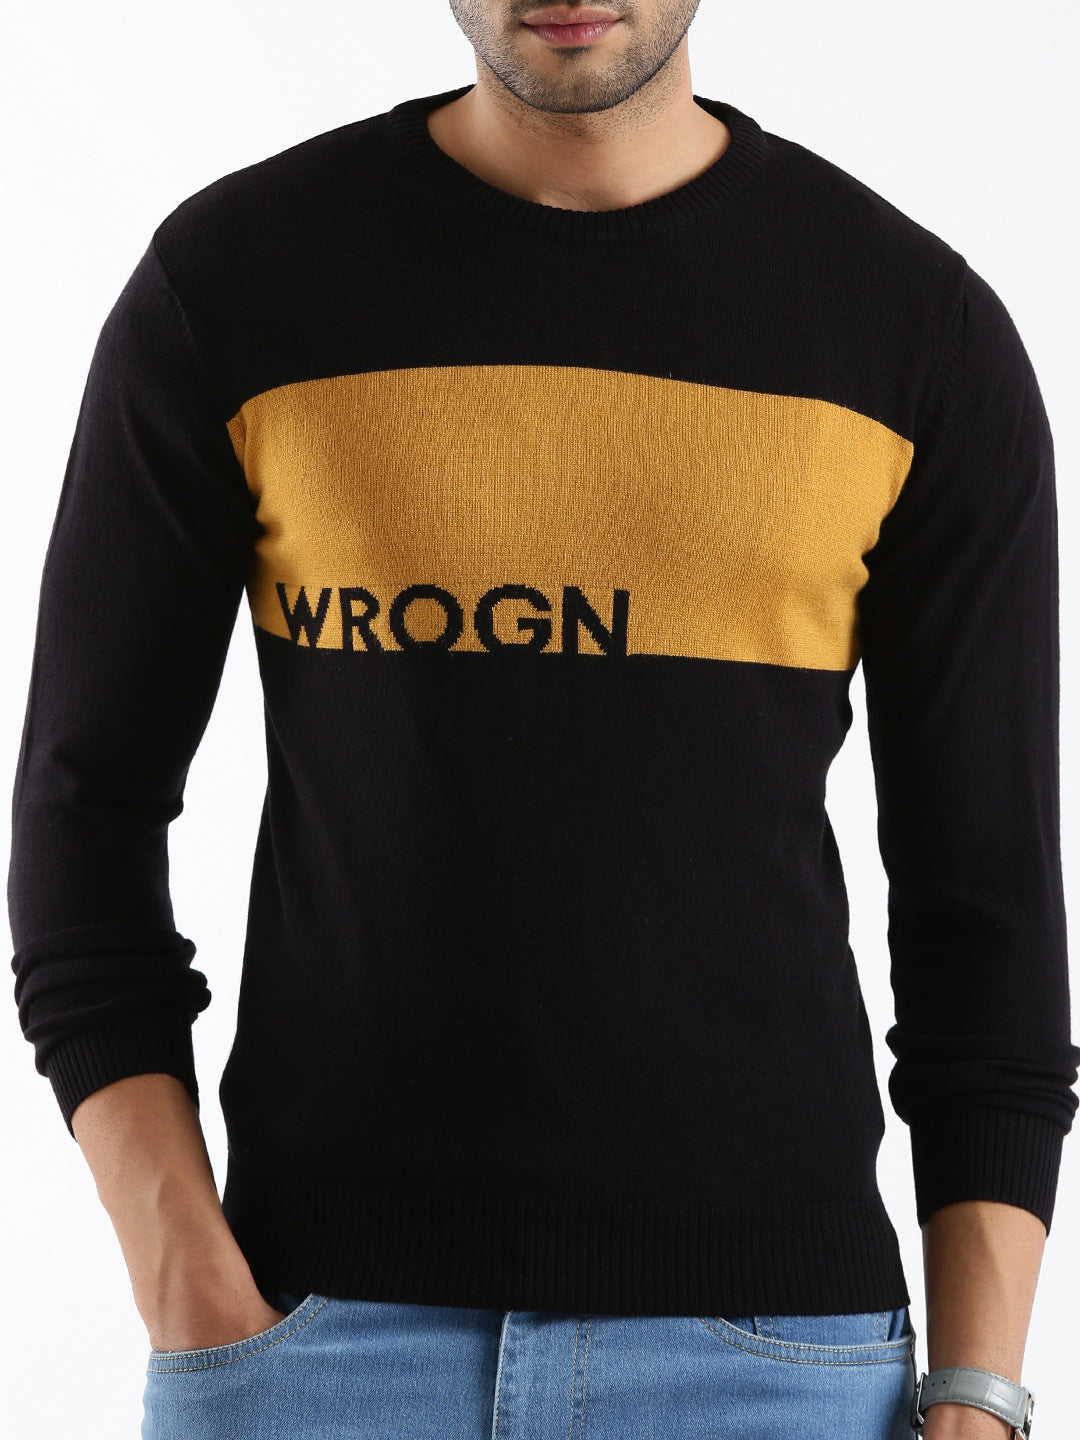 Colour-Blocked Wrogn Knit Sweater